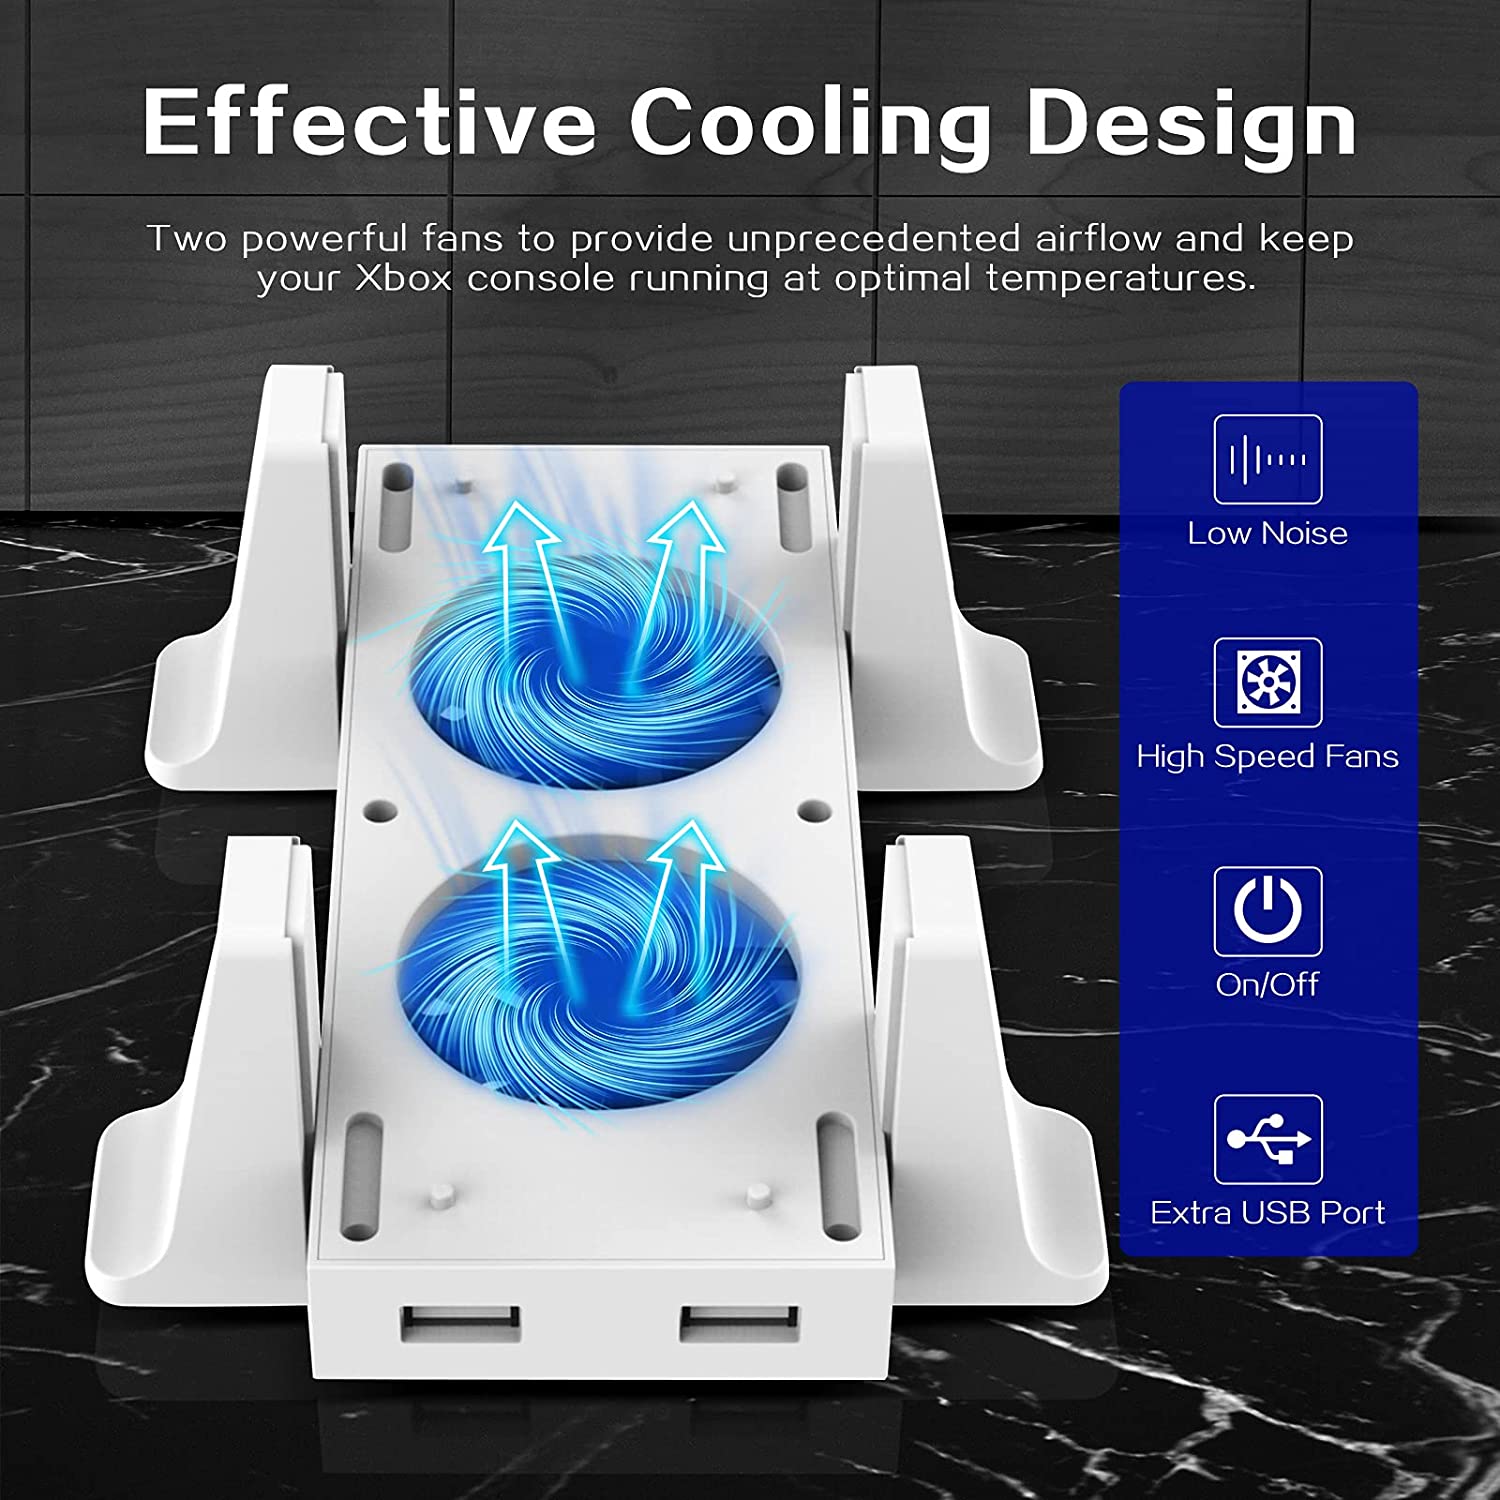 Efficient cooling design, with extra USB ports and low noise.